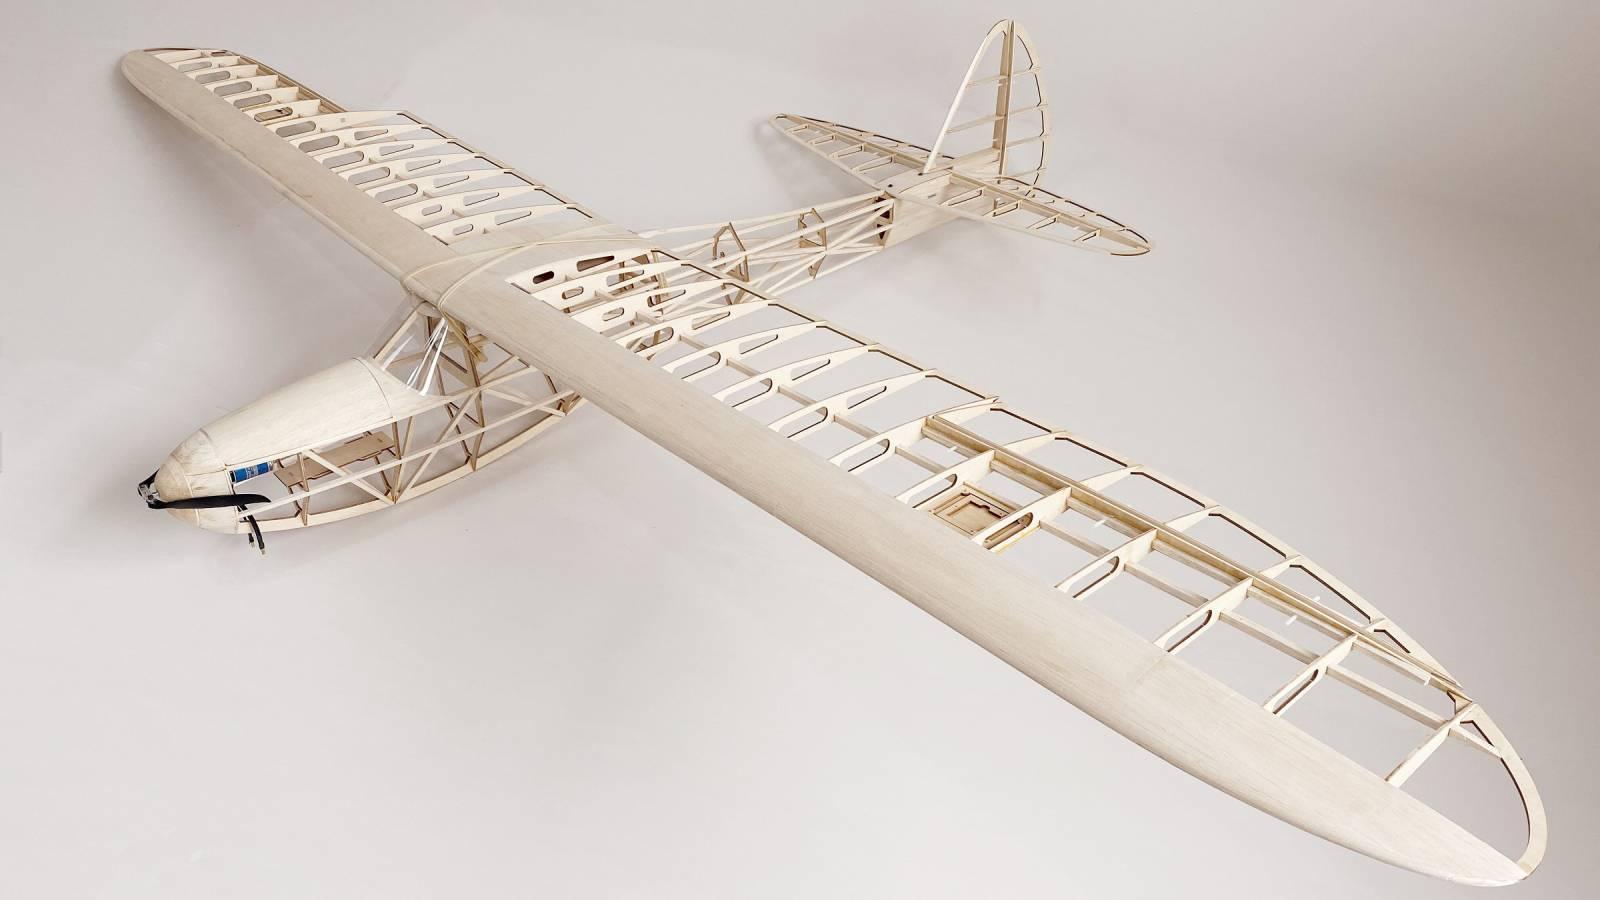 Vintage Rc Glider Kits: Vintage RC Glider Kits: A Unique, Affordable and Rewarding Hobby